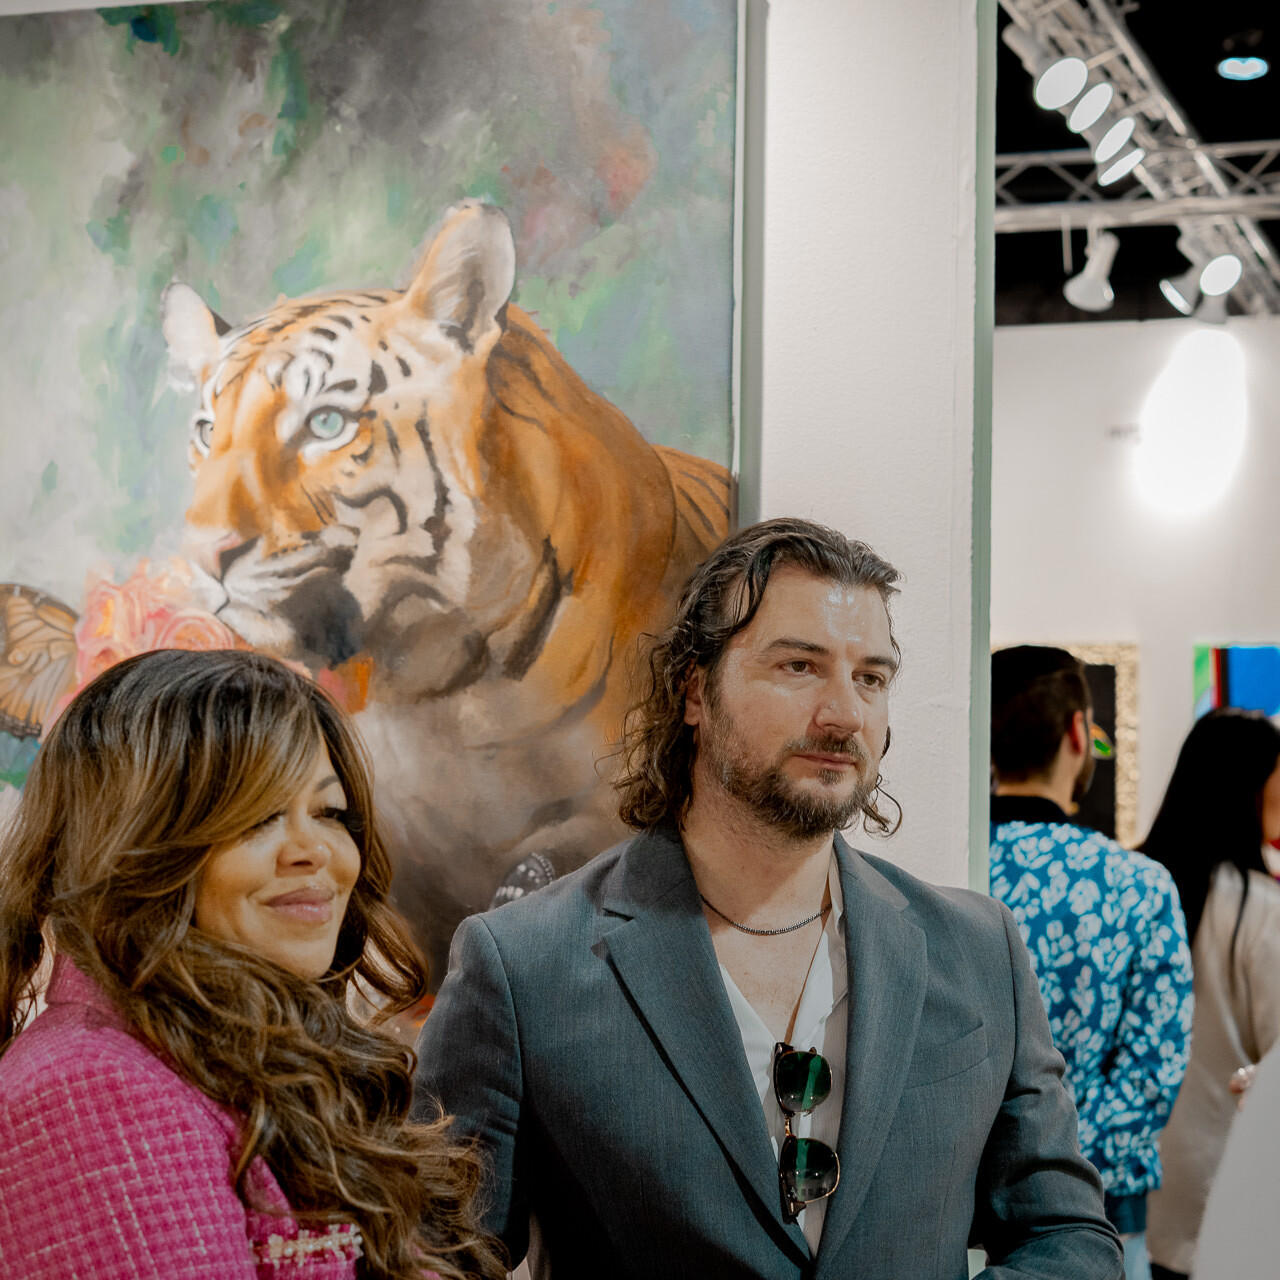 Stacy Francis and Alex Righetto attentively listen to art collectors at Miami Art Week, with Righetto's impactful painting 'The Guardian' enhancing the discussion.